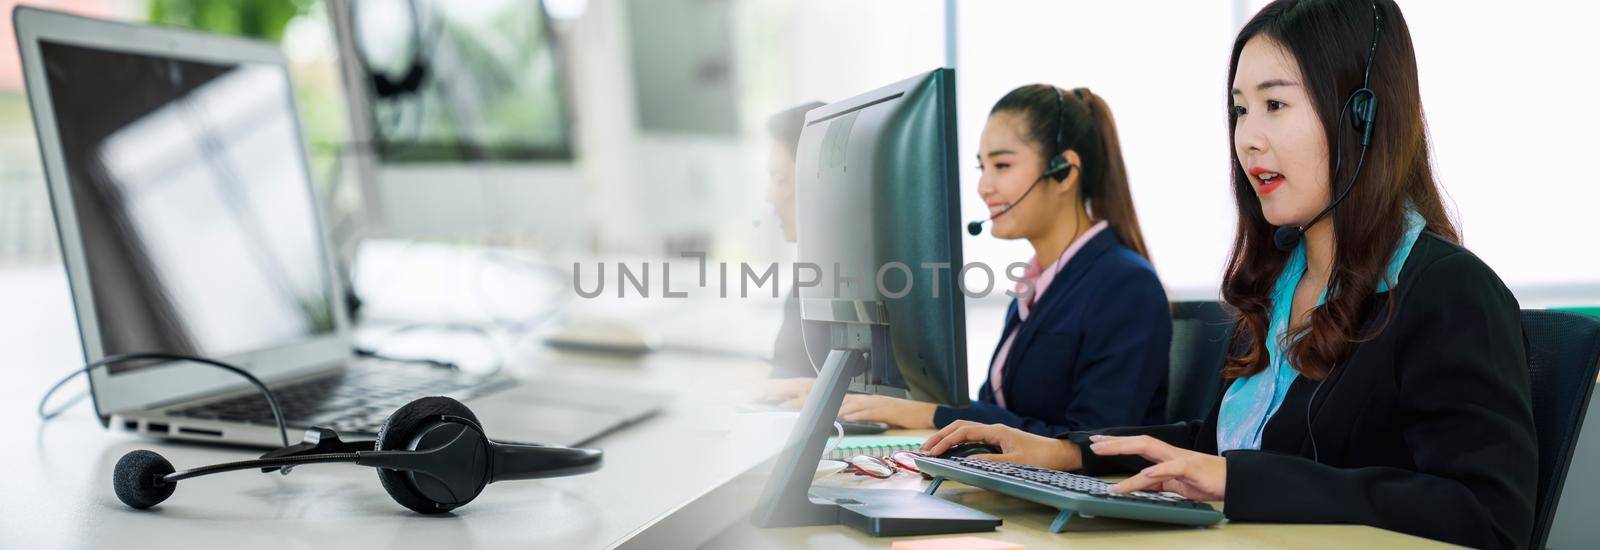 Business people wearing headset working in office in widen view to support remote customer or colleague. Call center, telemarketing, customer support agent provide service on telephone video call.